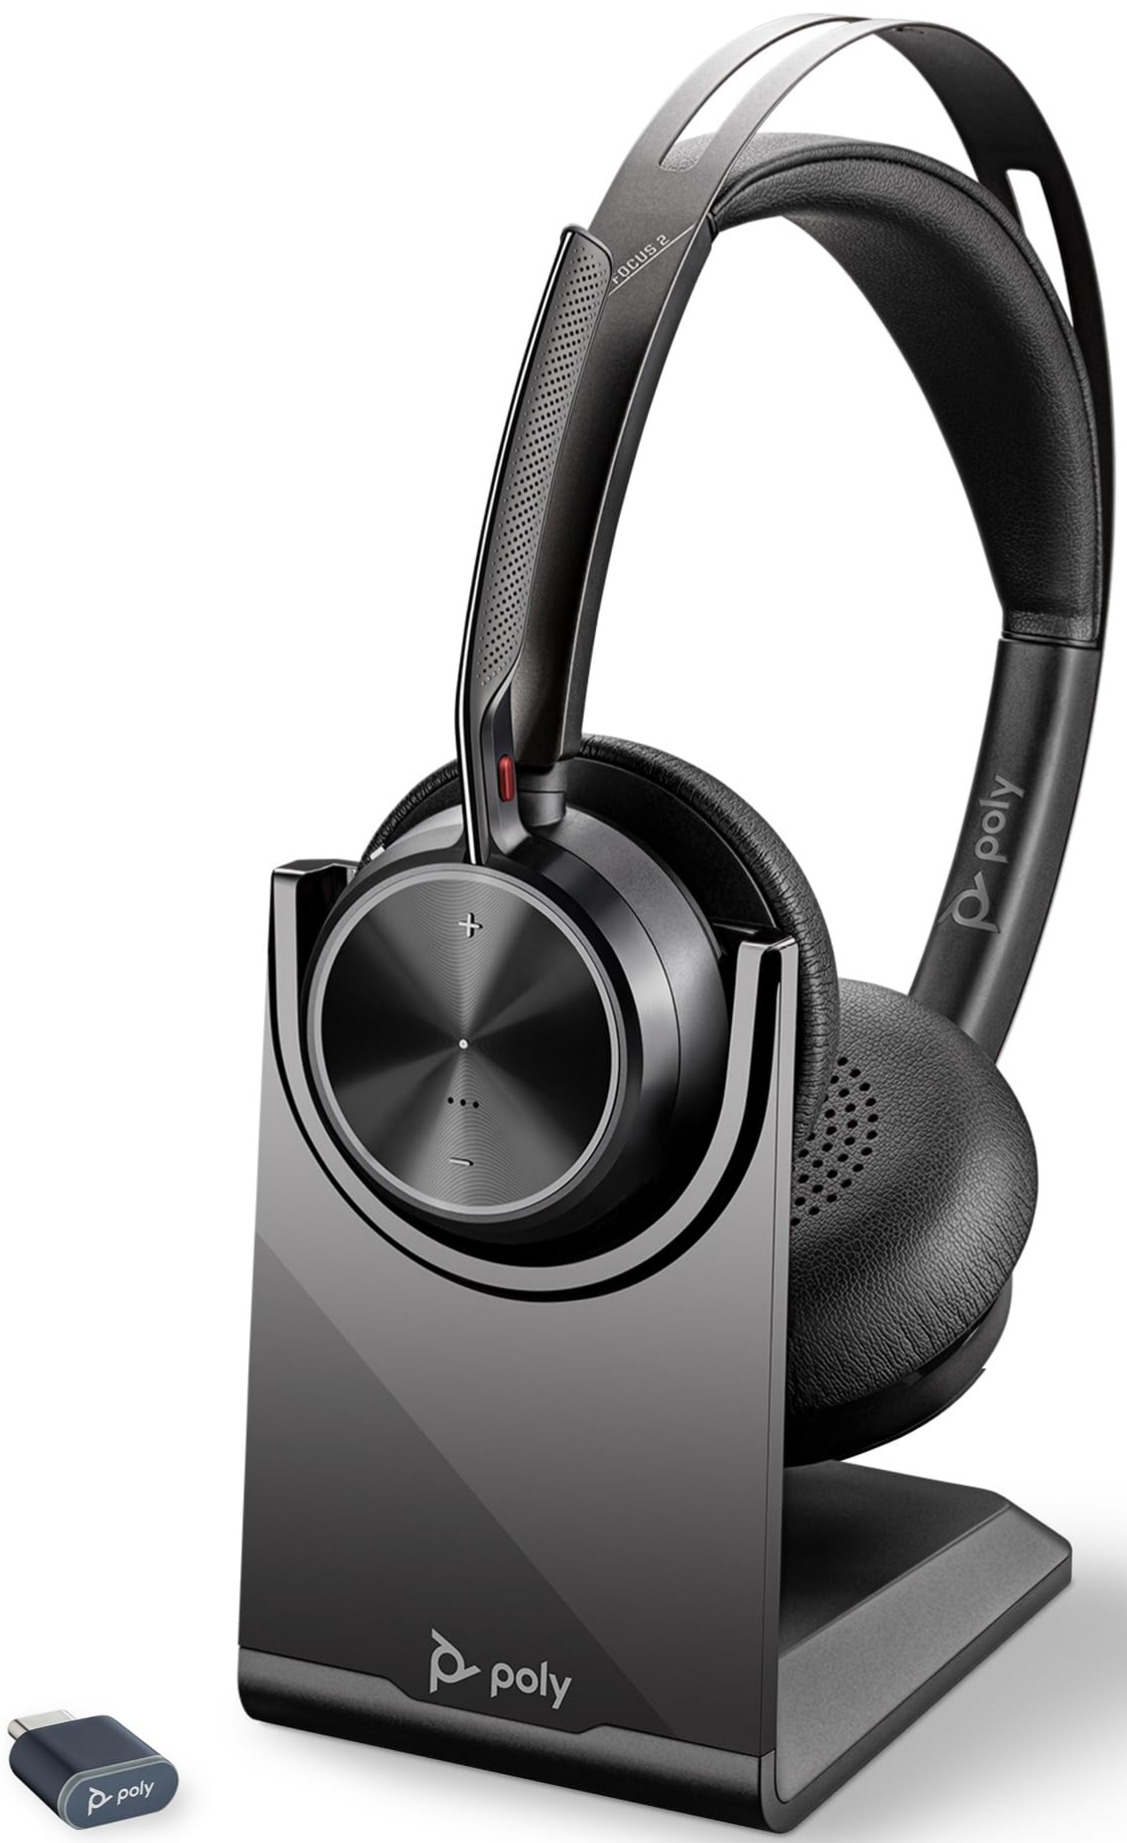 $149.99: Poly Voyager Focus 2 UC Wireless Headset with Microphone & Charge Stand (Plantronics)